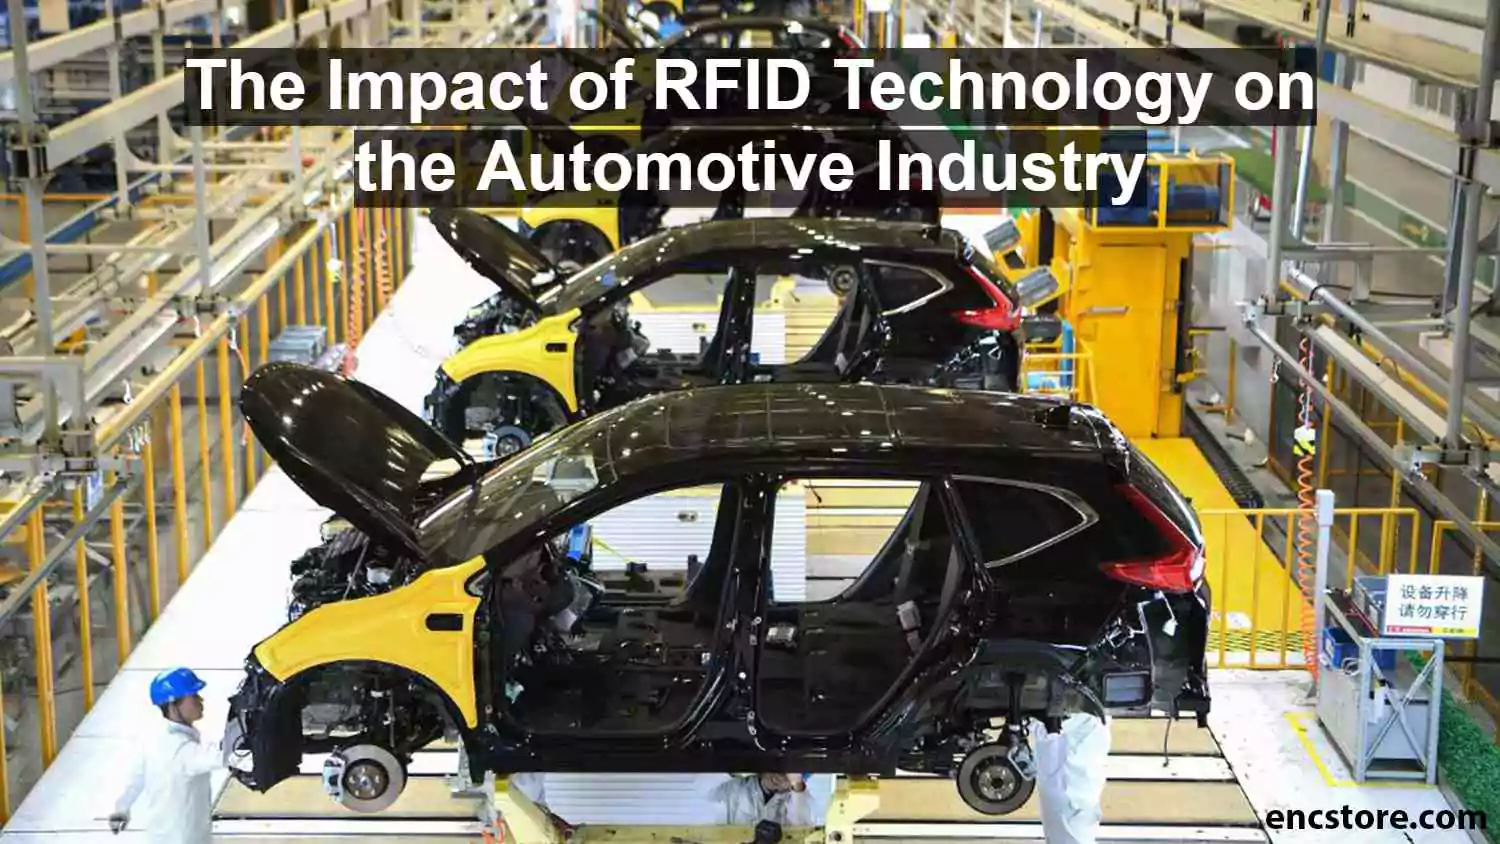 The Impact of RFID Technology on the Automotive Industry